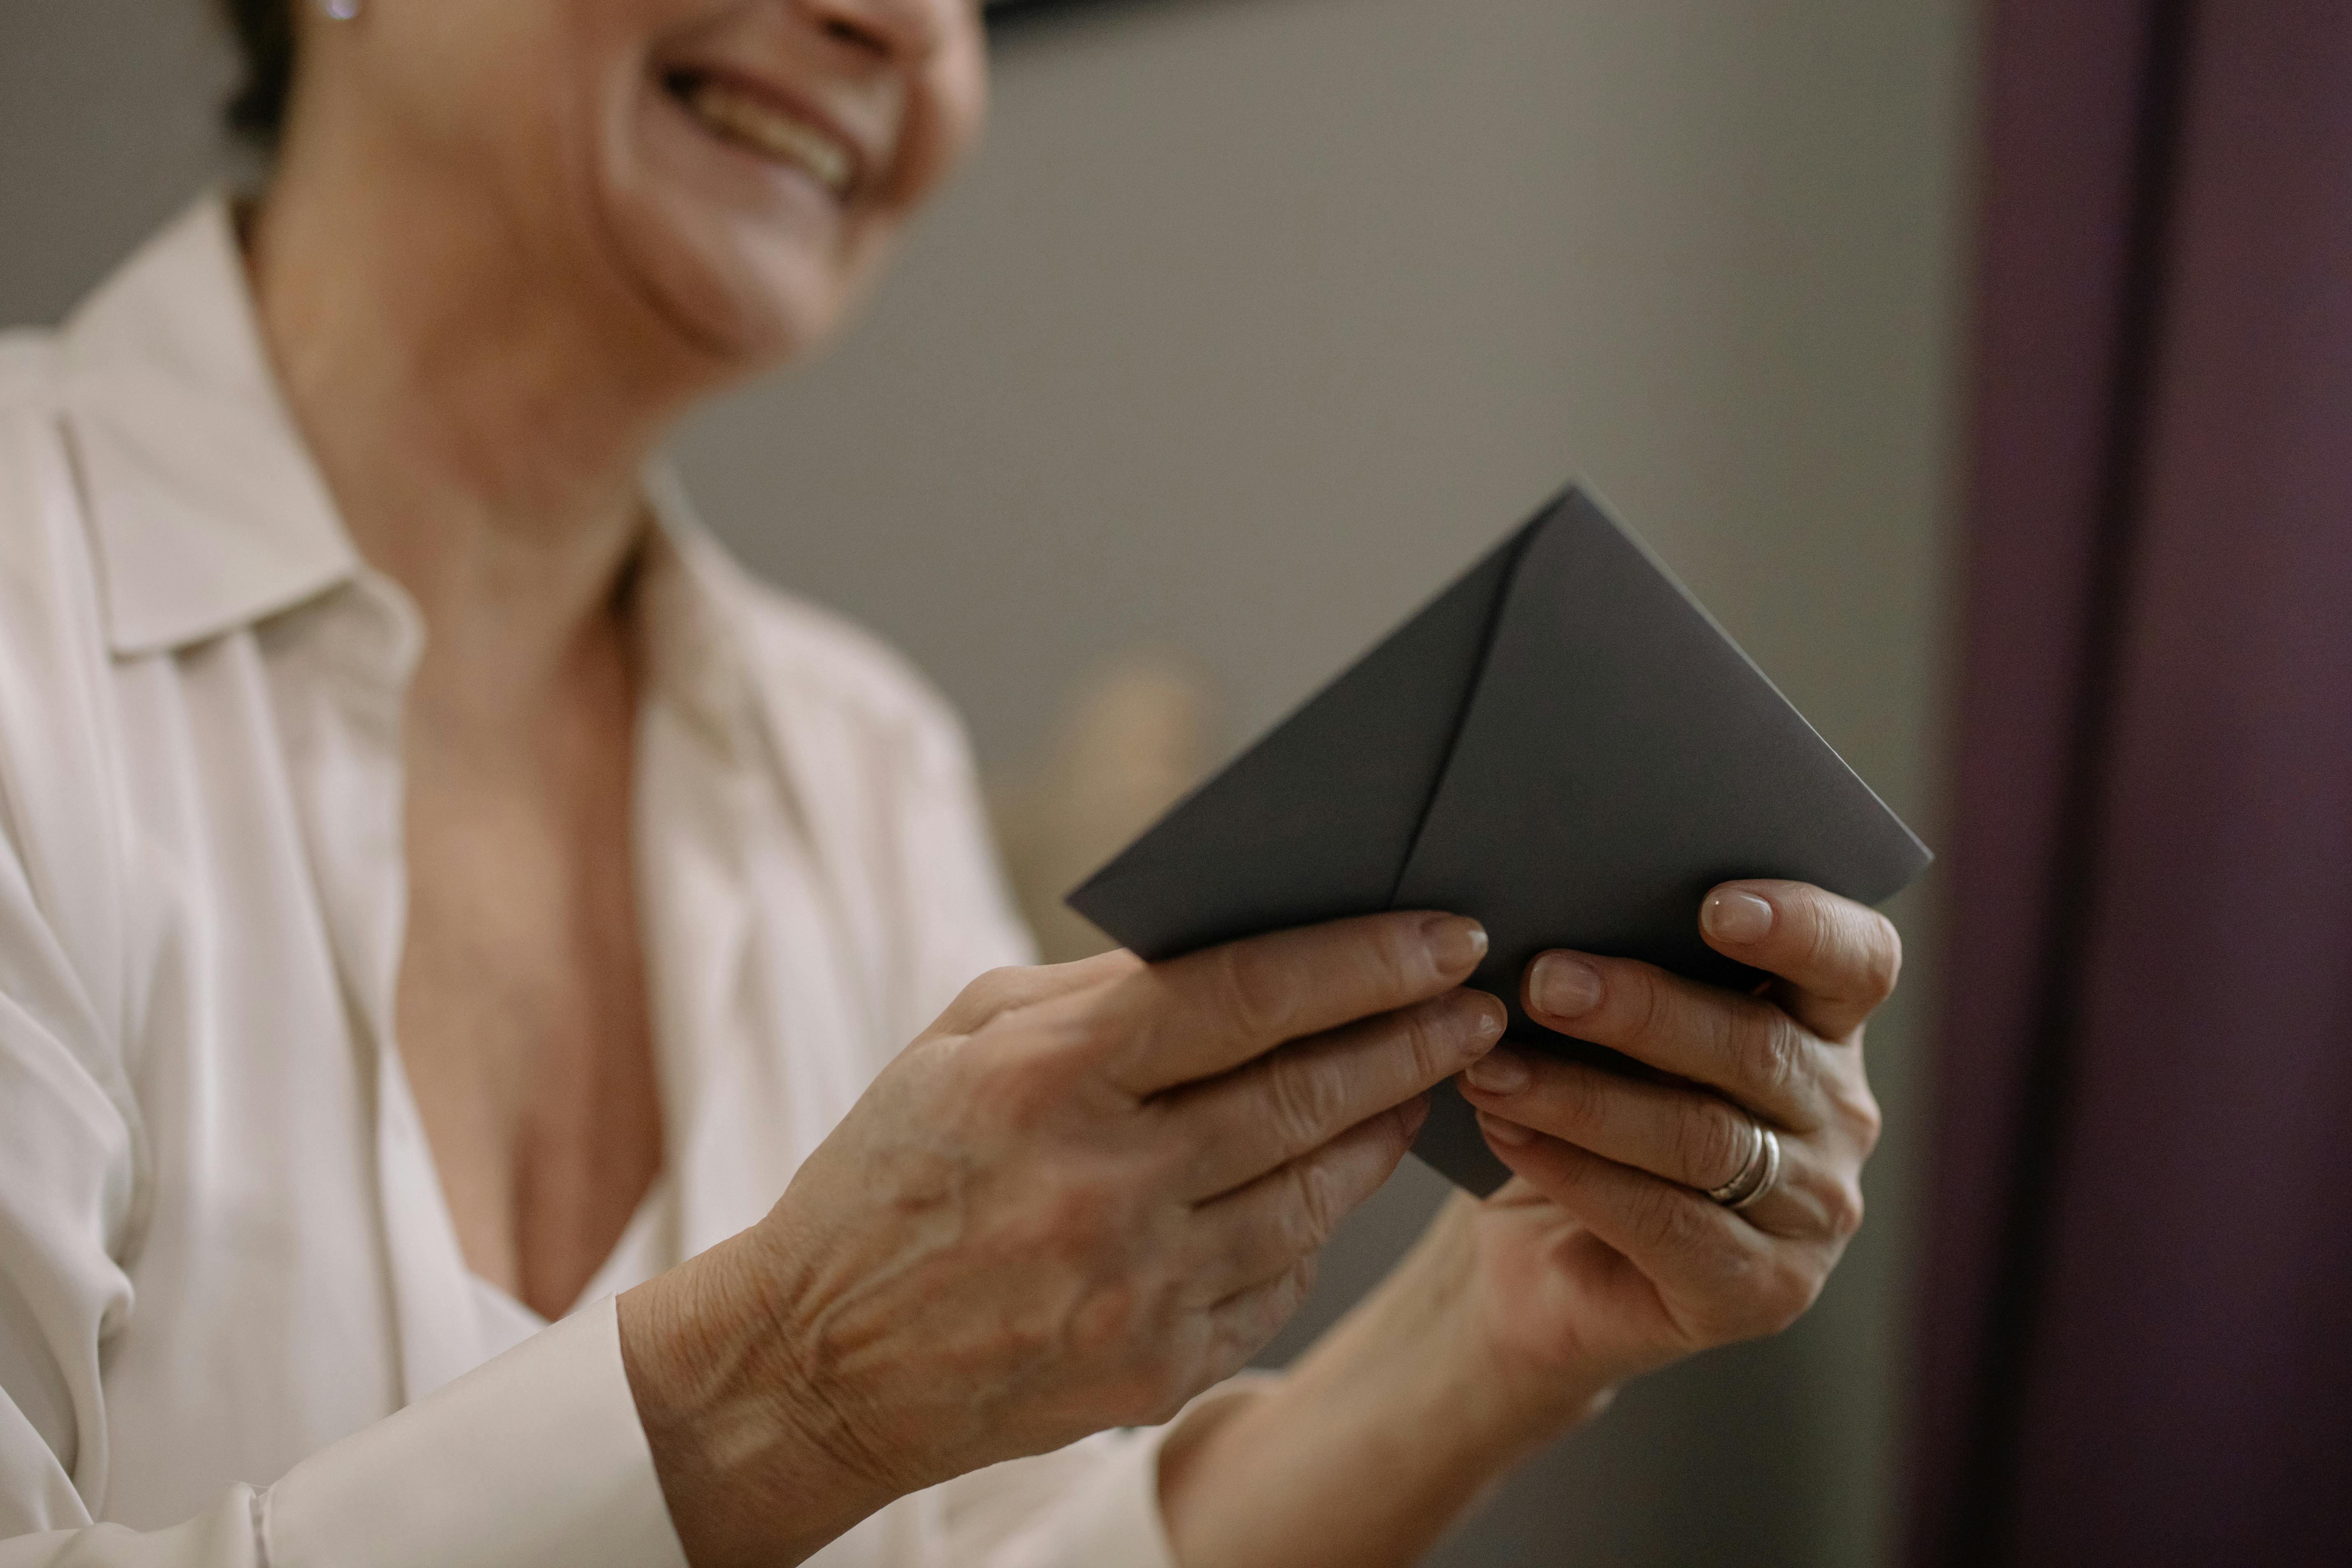 A woman holding an envelope | Source: Pexels